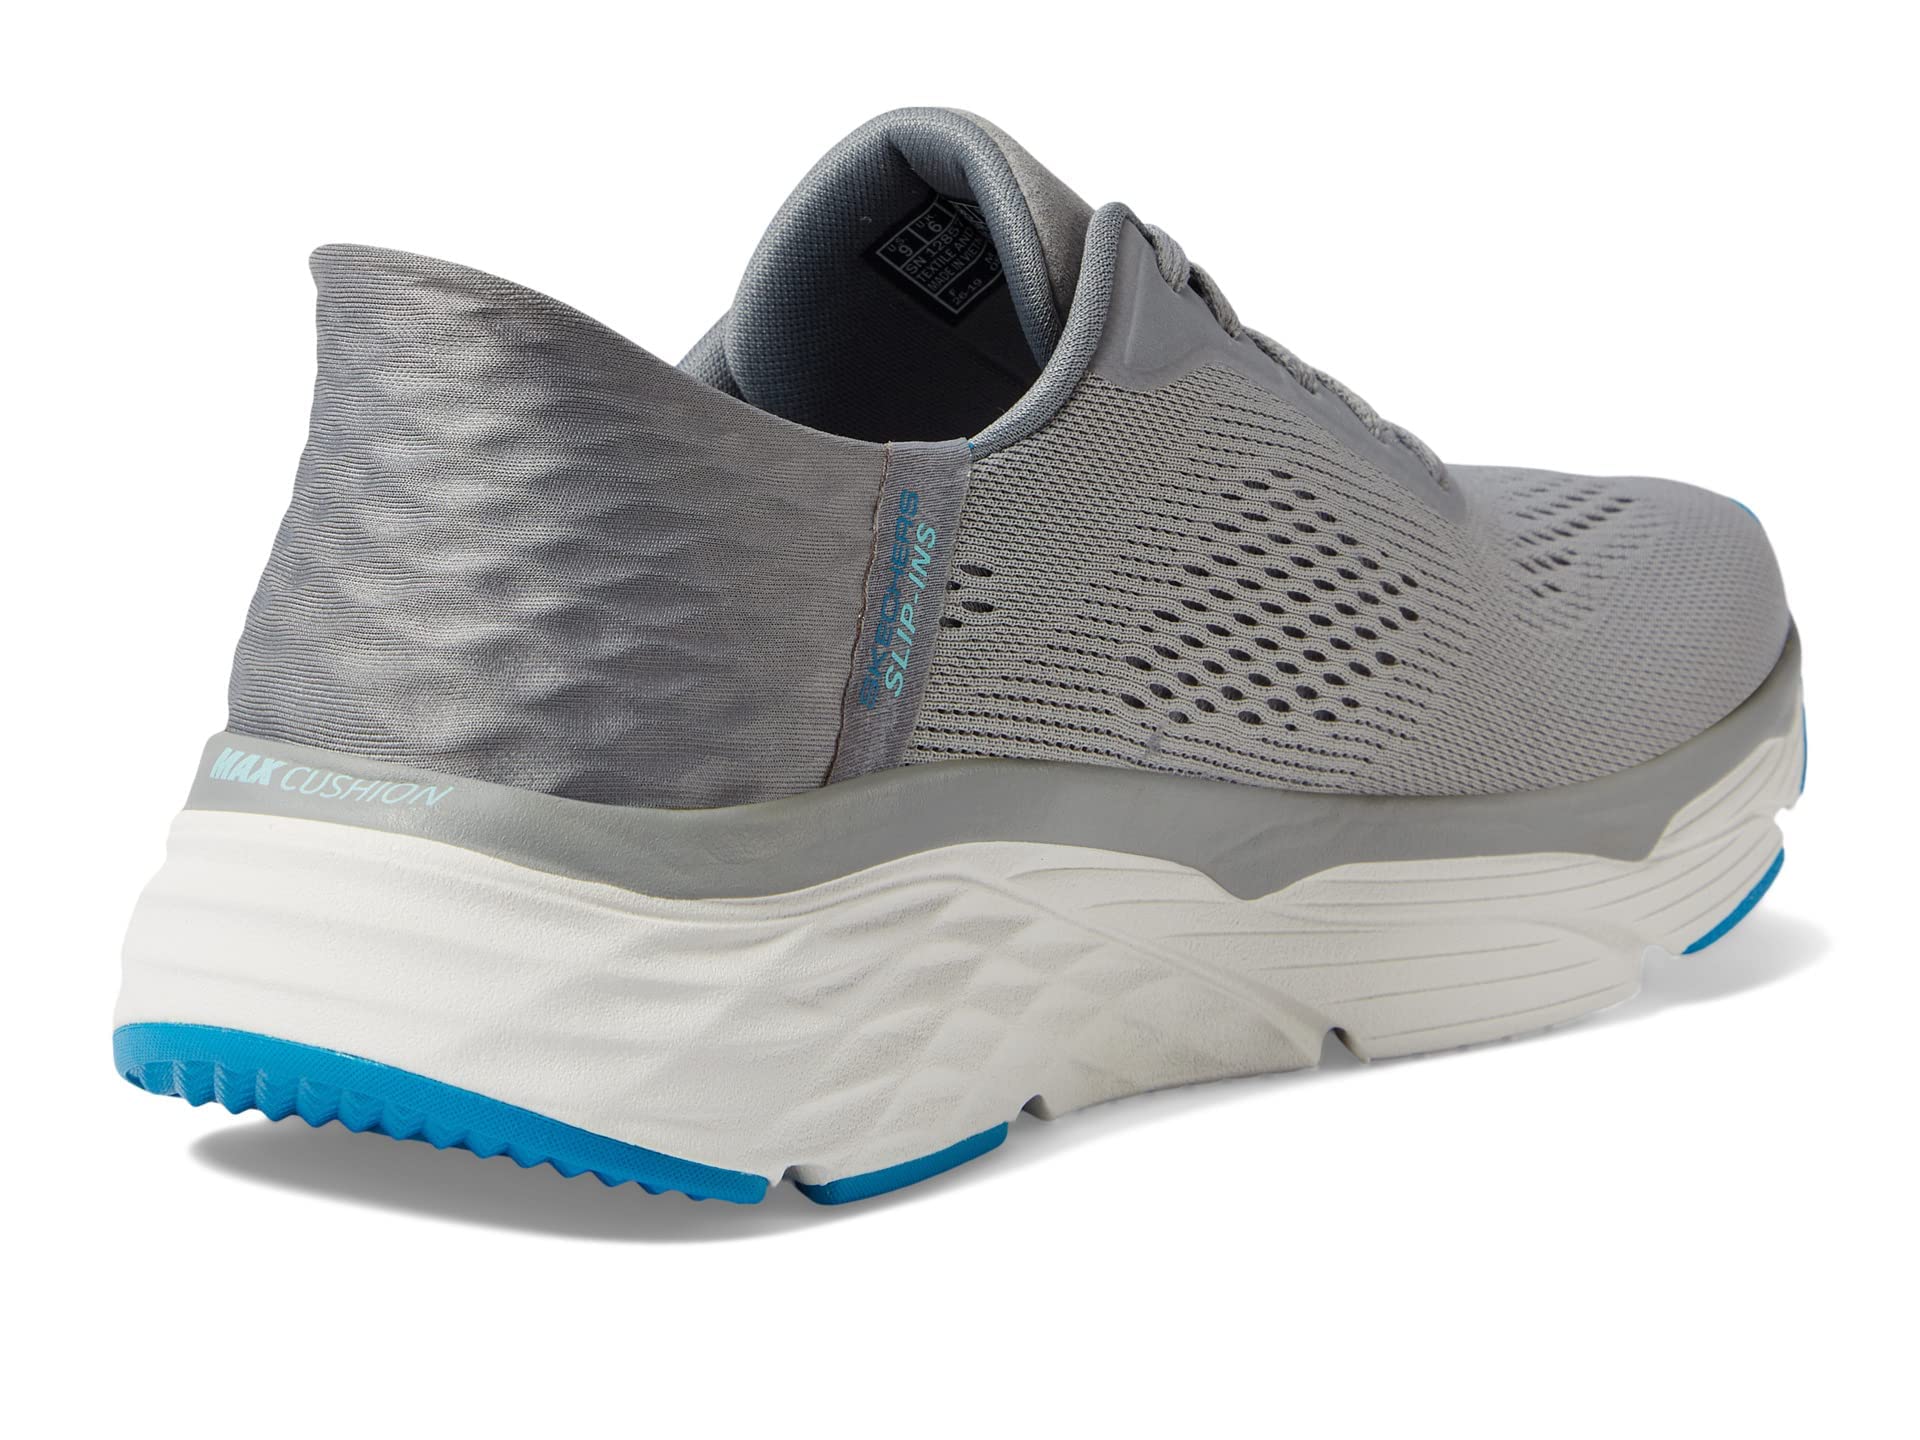 Skechers Women's Hands Free Slip-Ins Max Cushioning Elite-Mystic Passion Sneaker, Charcoal/Teal, 8